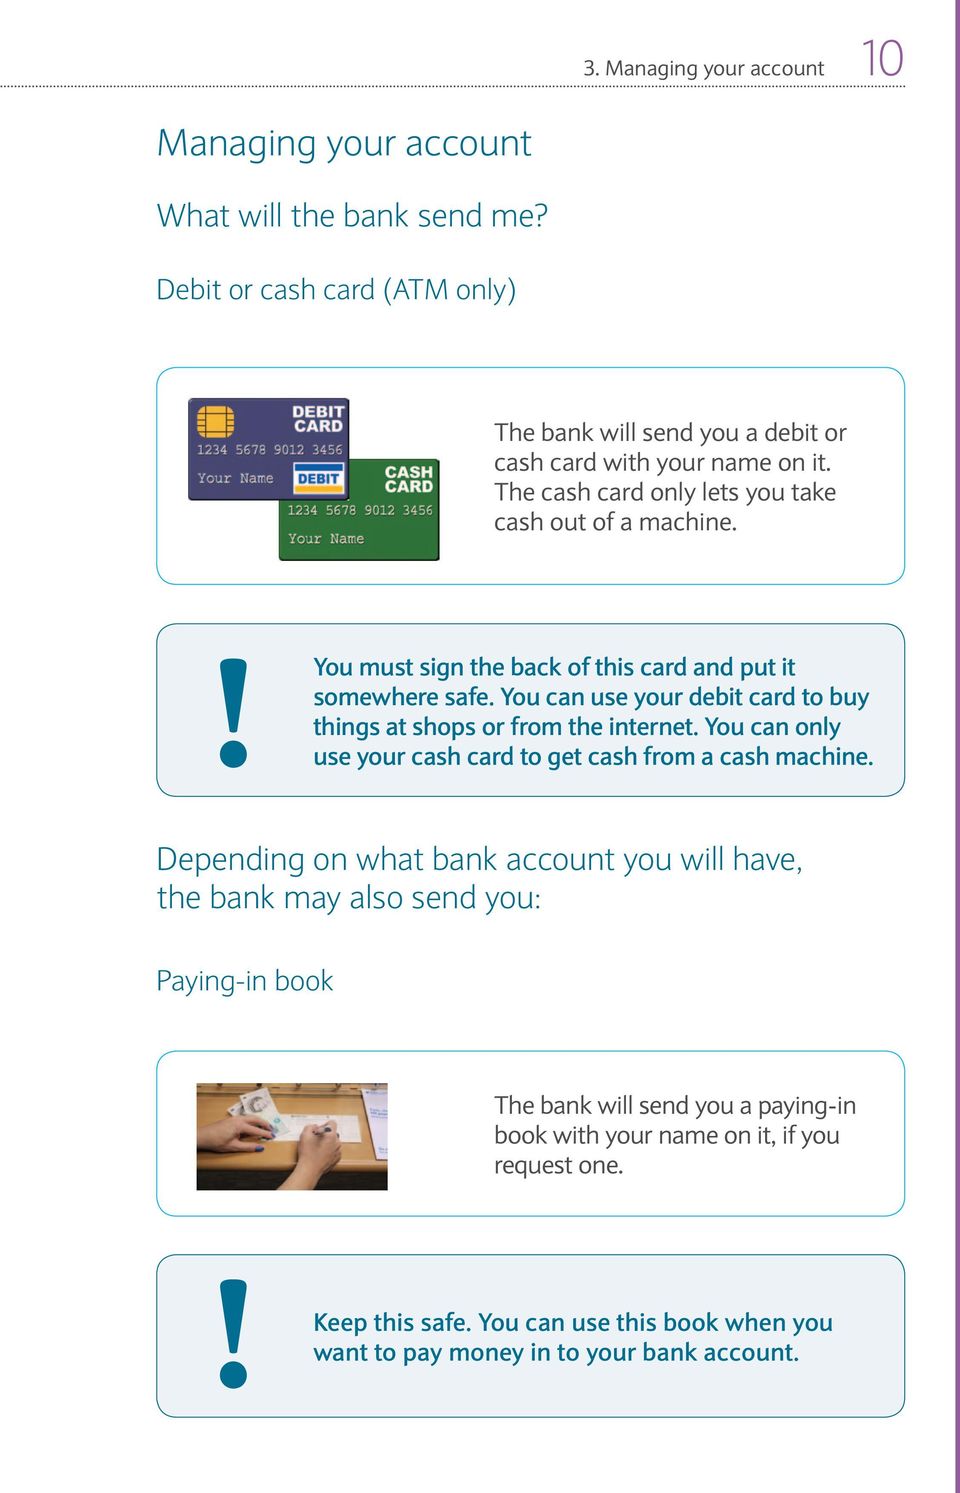 You can use your debit card to buy things at shops or from the internet. You can only use your cash card to get cash from a cash machine.